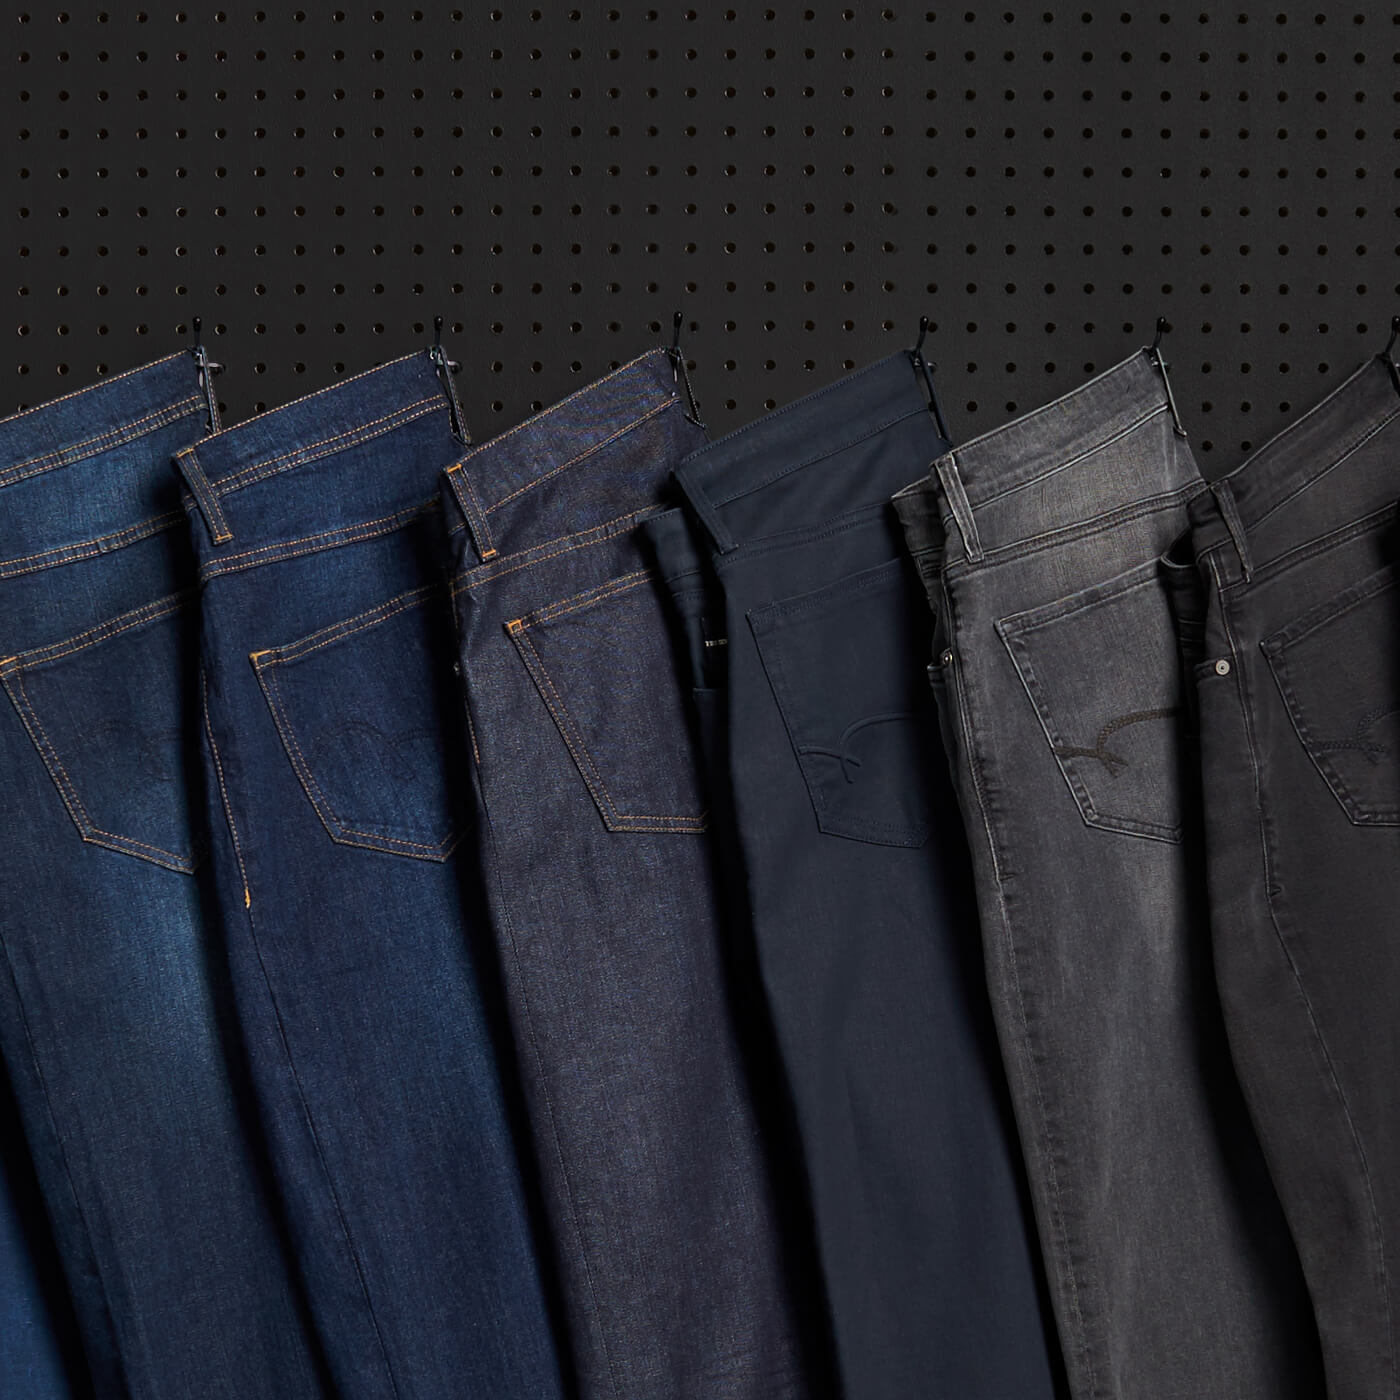 best jeans for tall slim guys